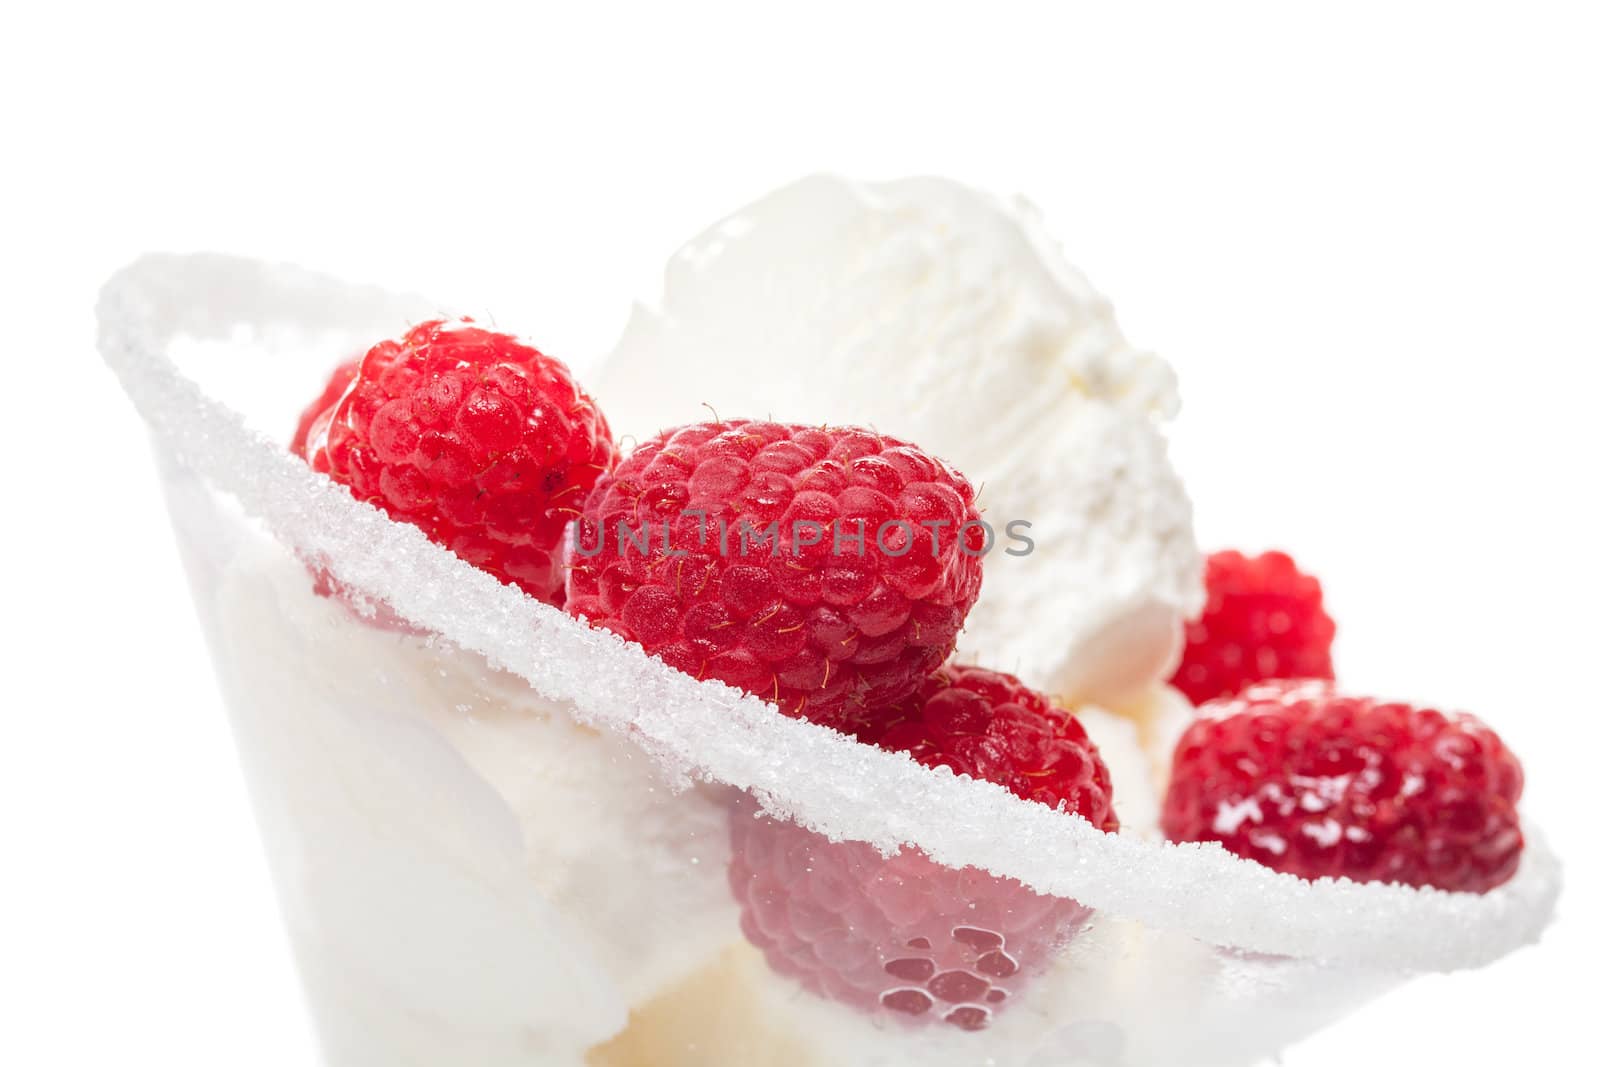 Ice Cream with Raspberries by Discovod